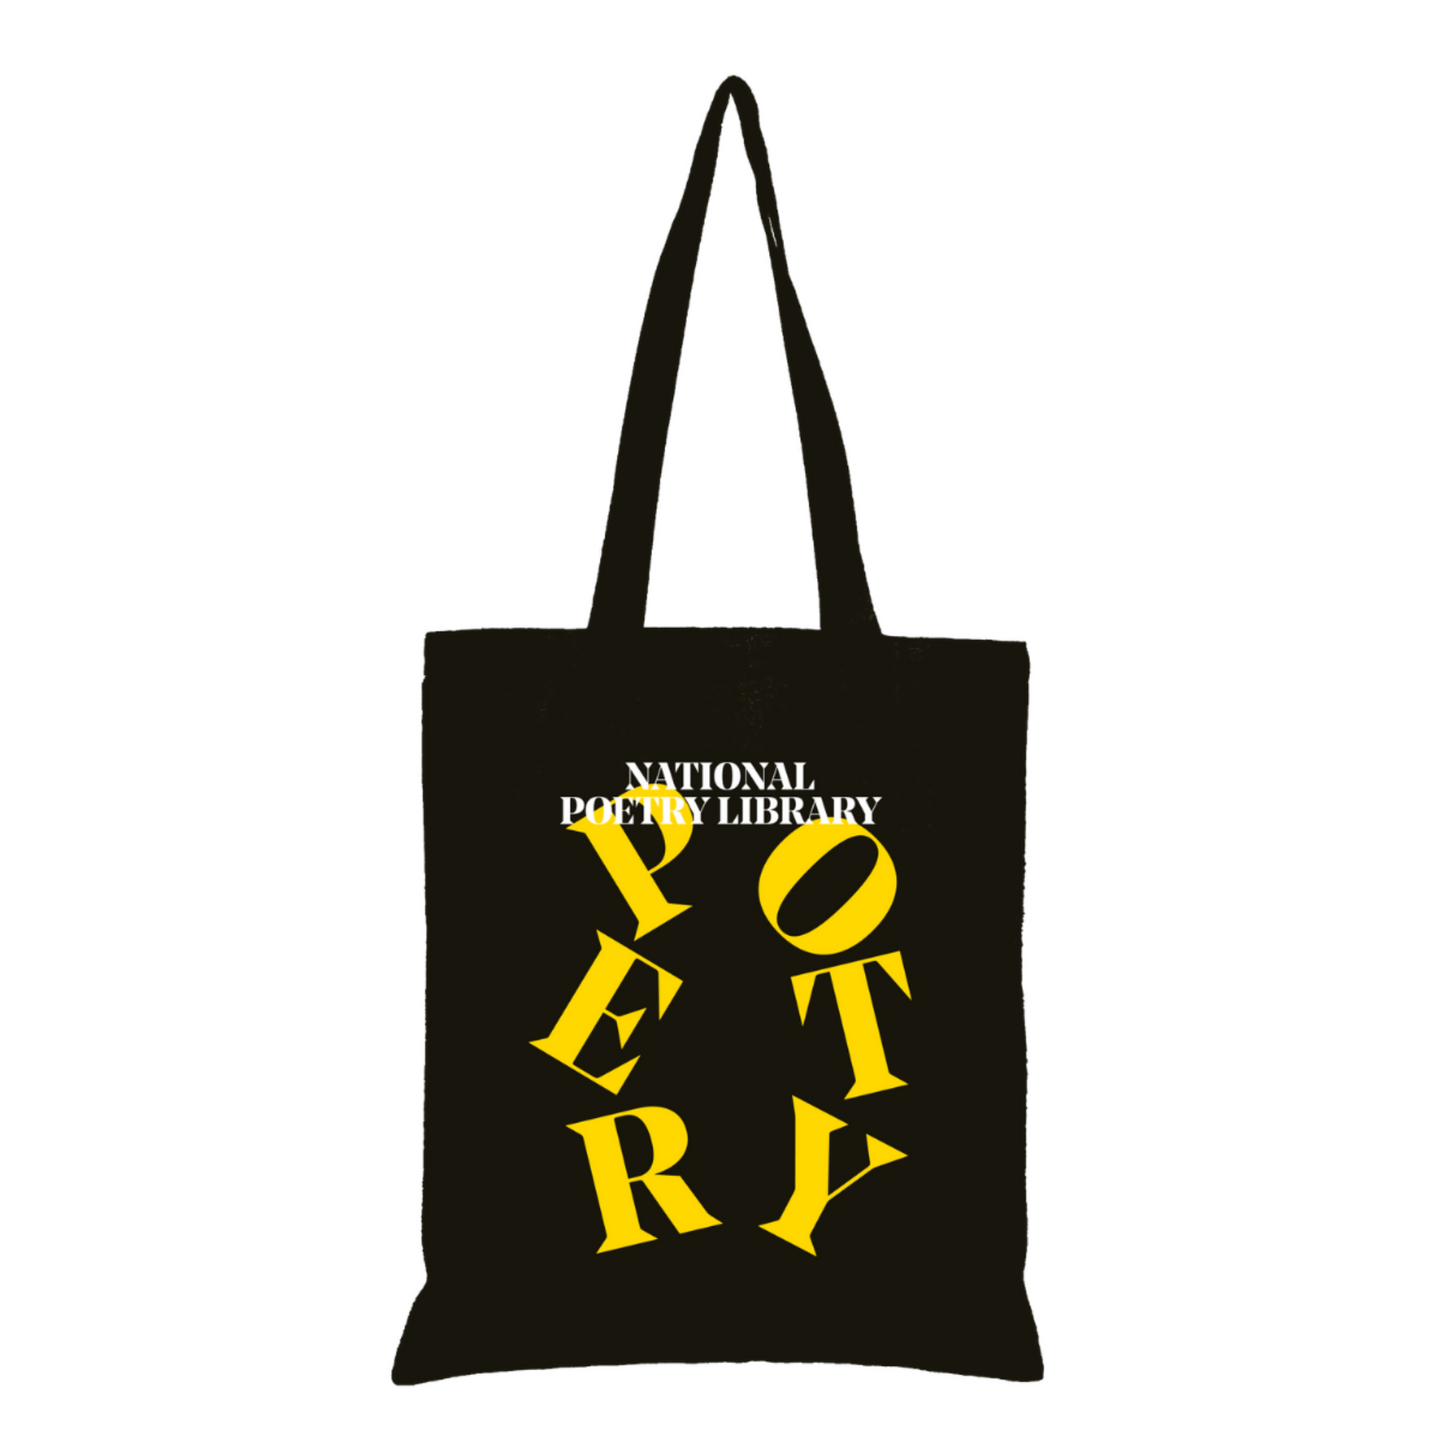 National Poetry Library Tote Bag